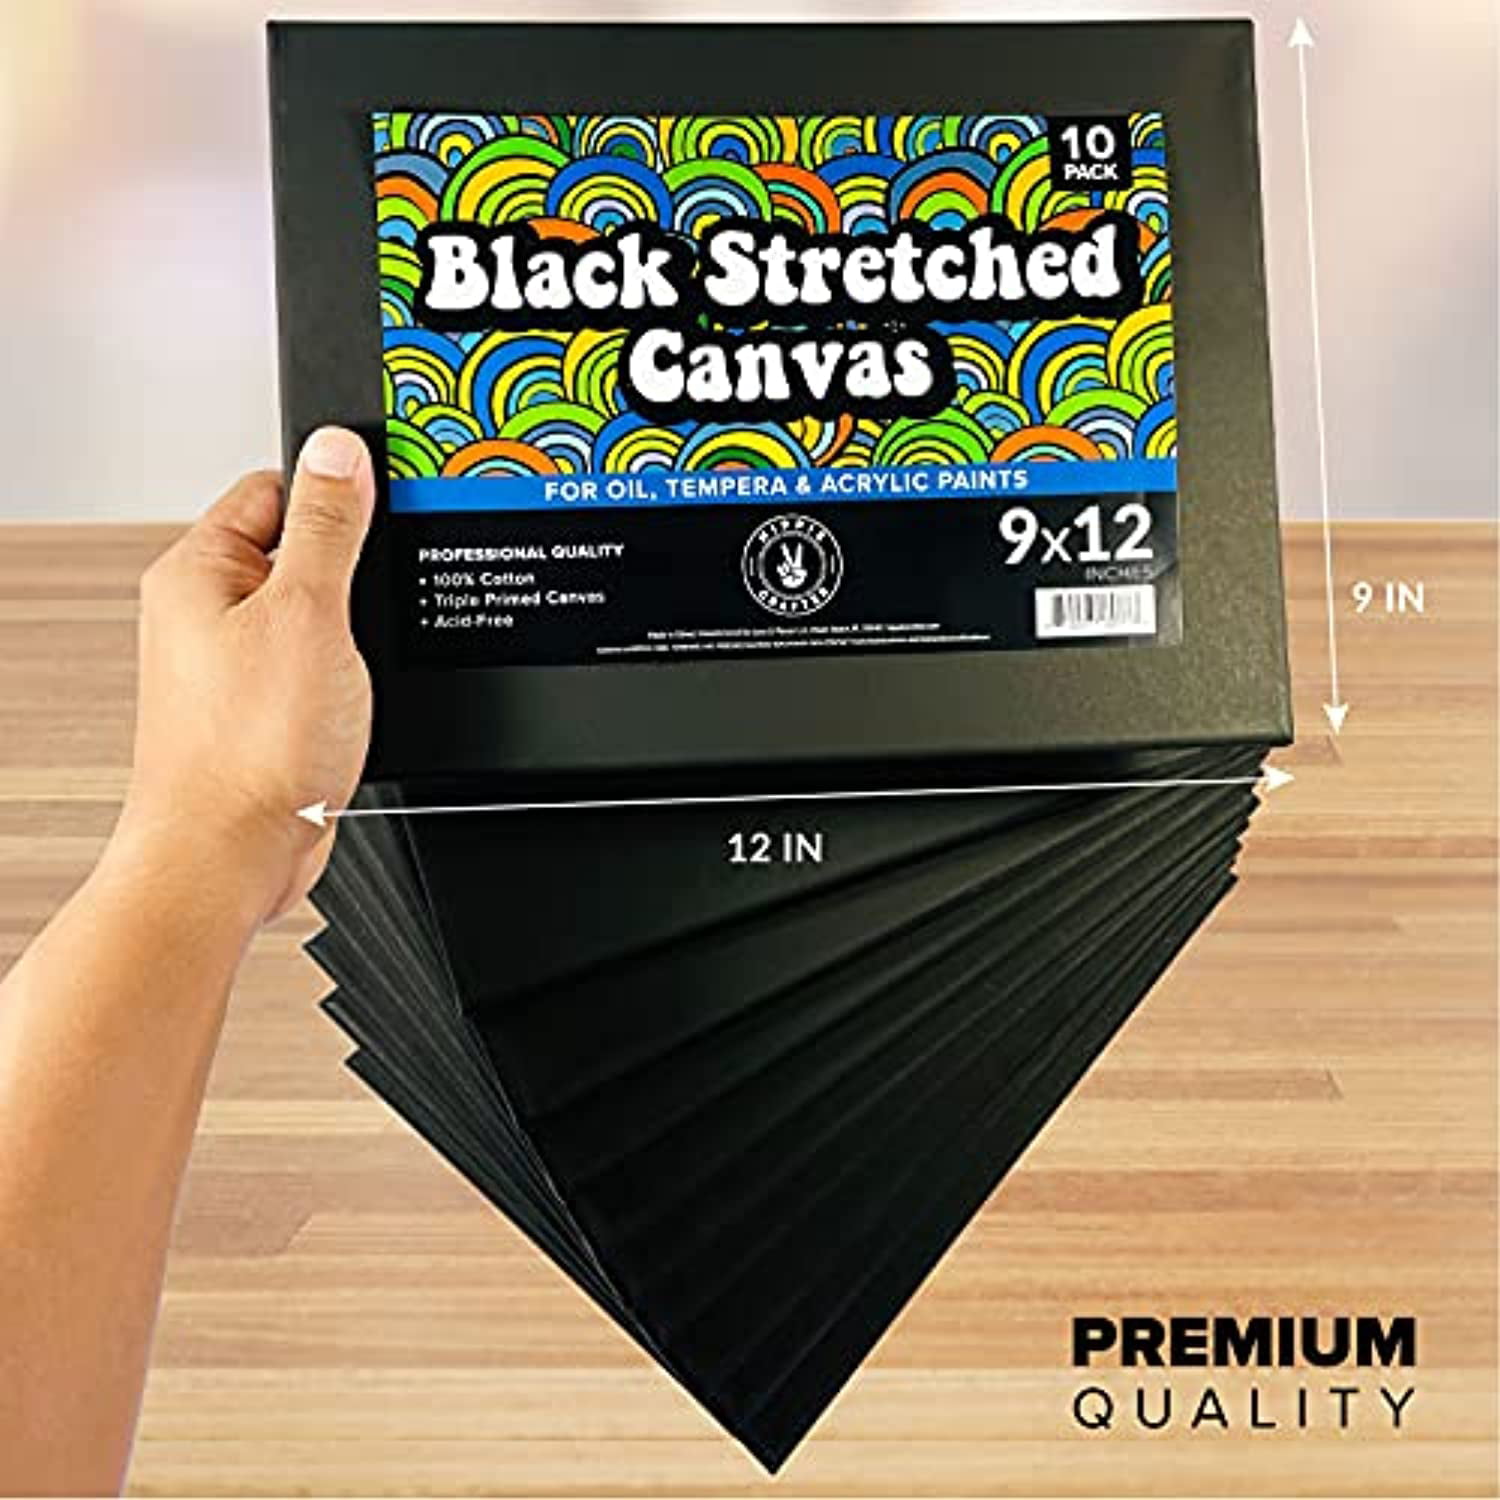  GOTIDEAL 10Pcs Black Stretched Canvases for Painting